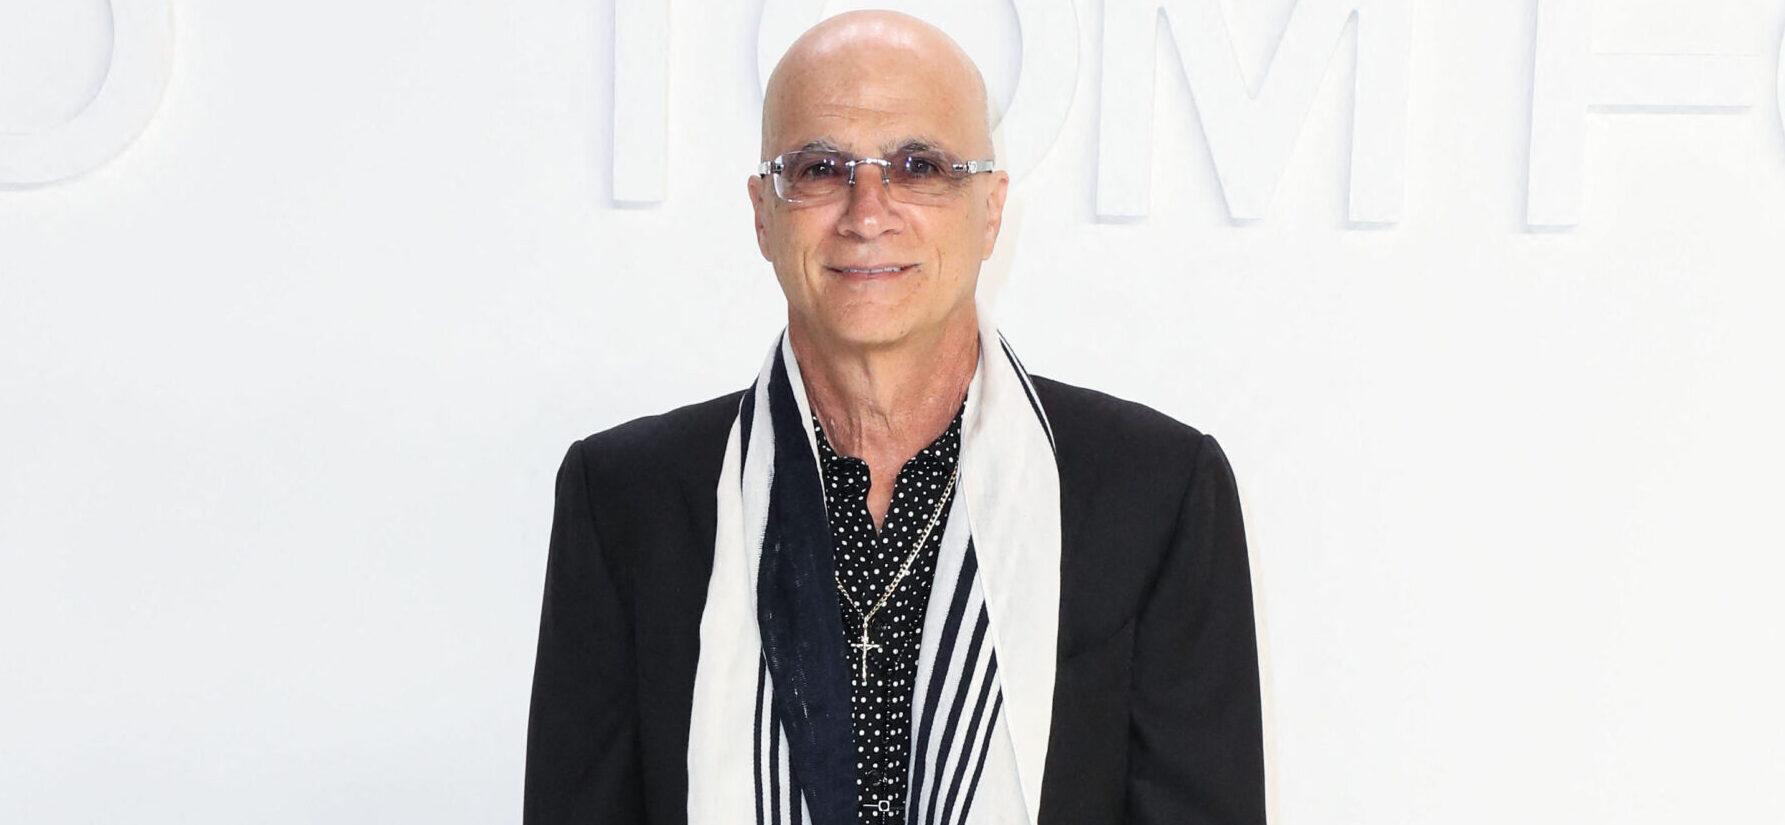 Music Mogul Jimmy Iovine Sued By Woman For ‘Sexual Abuse’